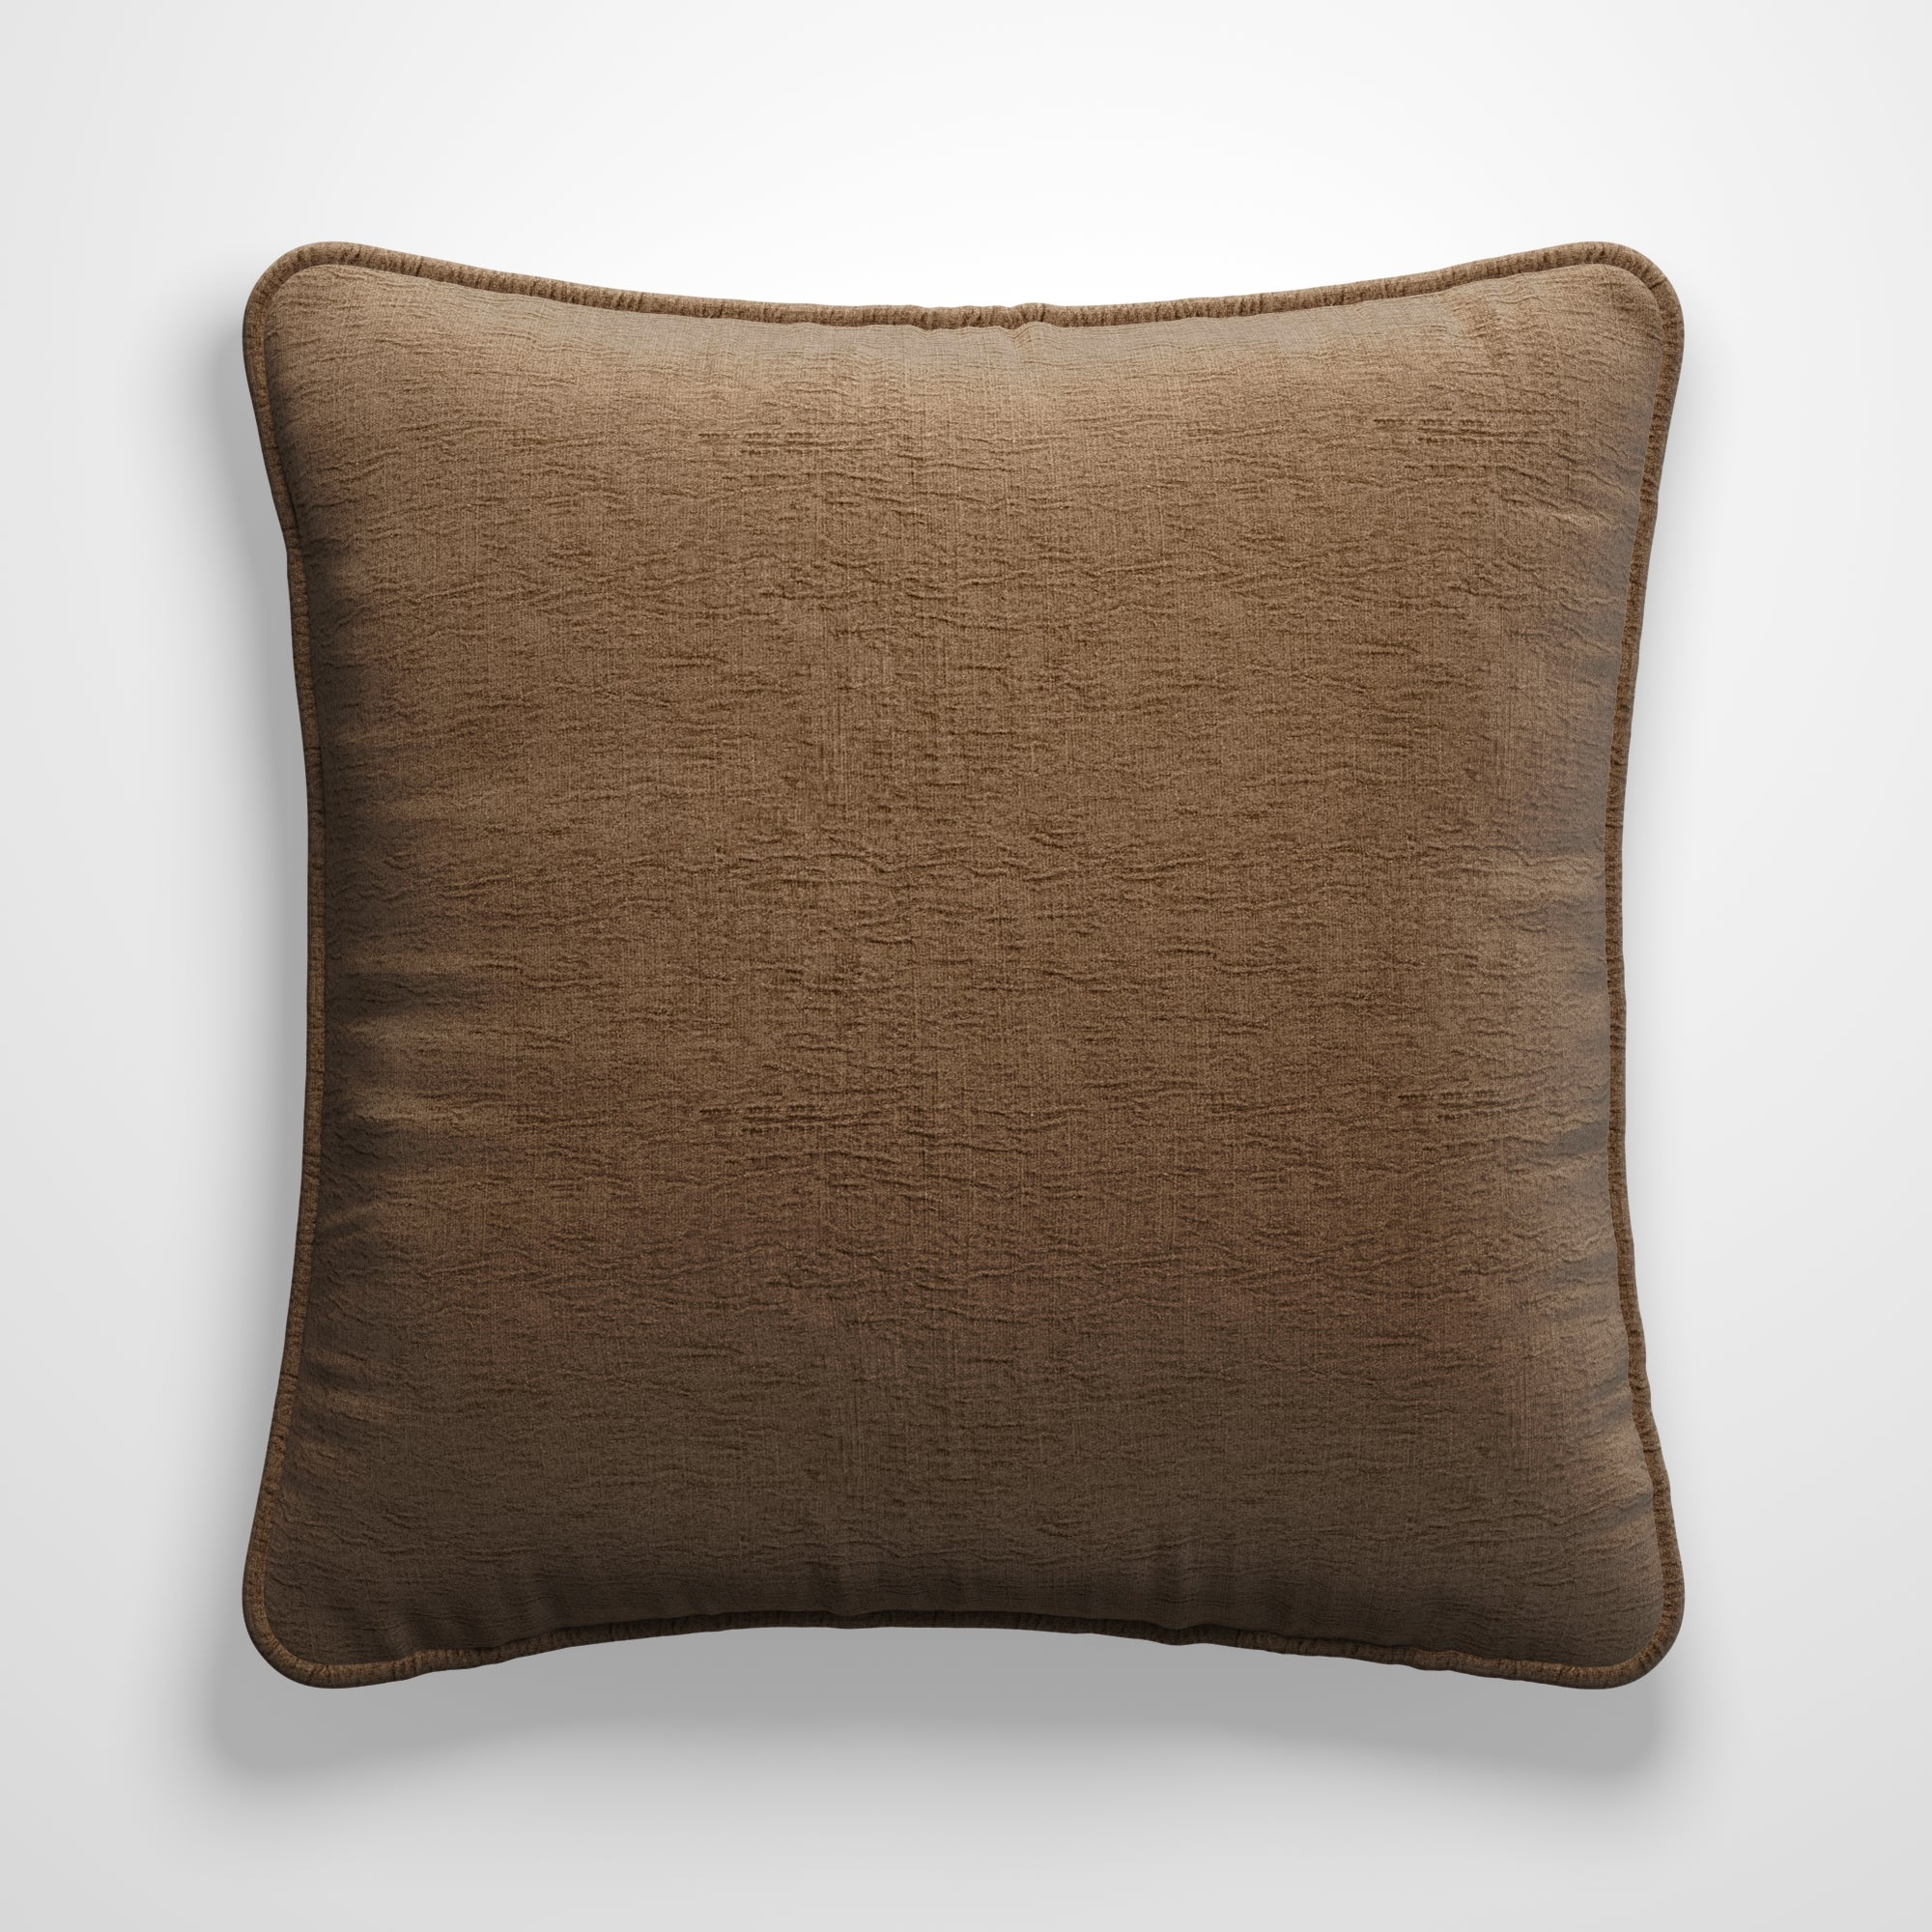 Barcelona Made to Order Cushion Cover Barcelona Taupe